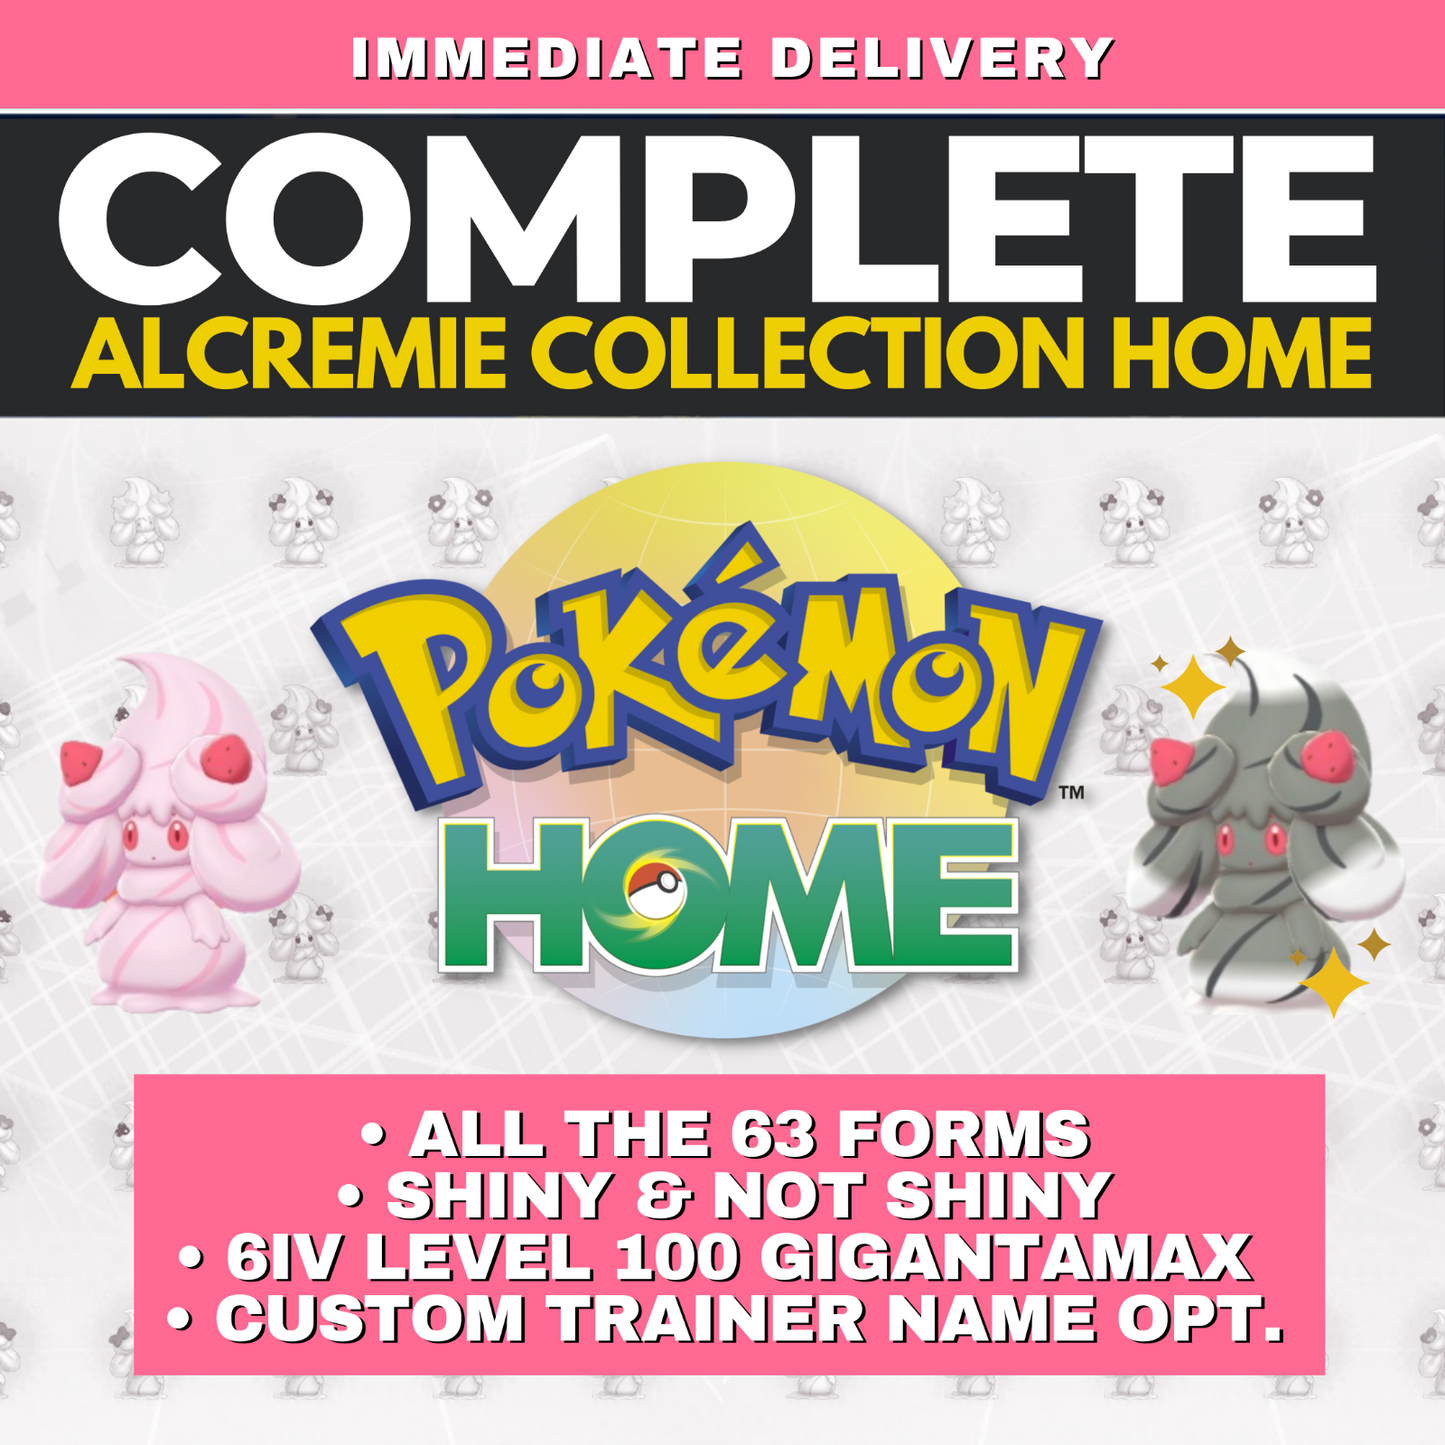 All Alcremie Pokémon HOME Complete Collection All the 63 forms Shiny Non 6 IV by Shiny Living Dex | Shiny Living Dex